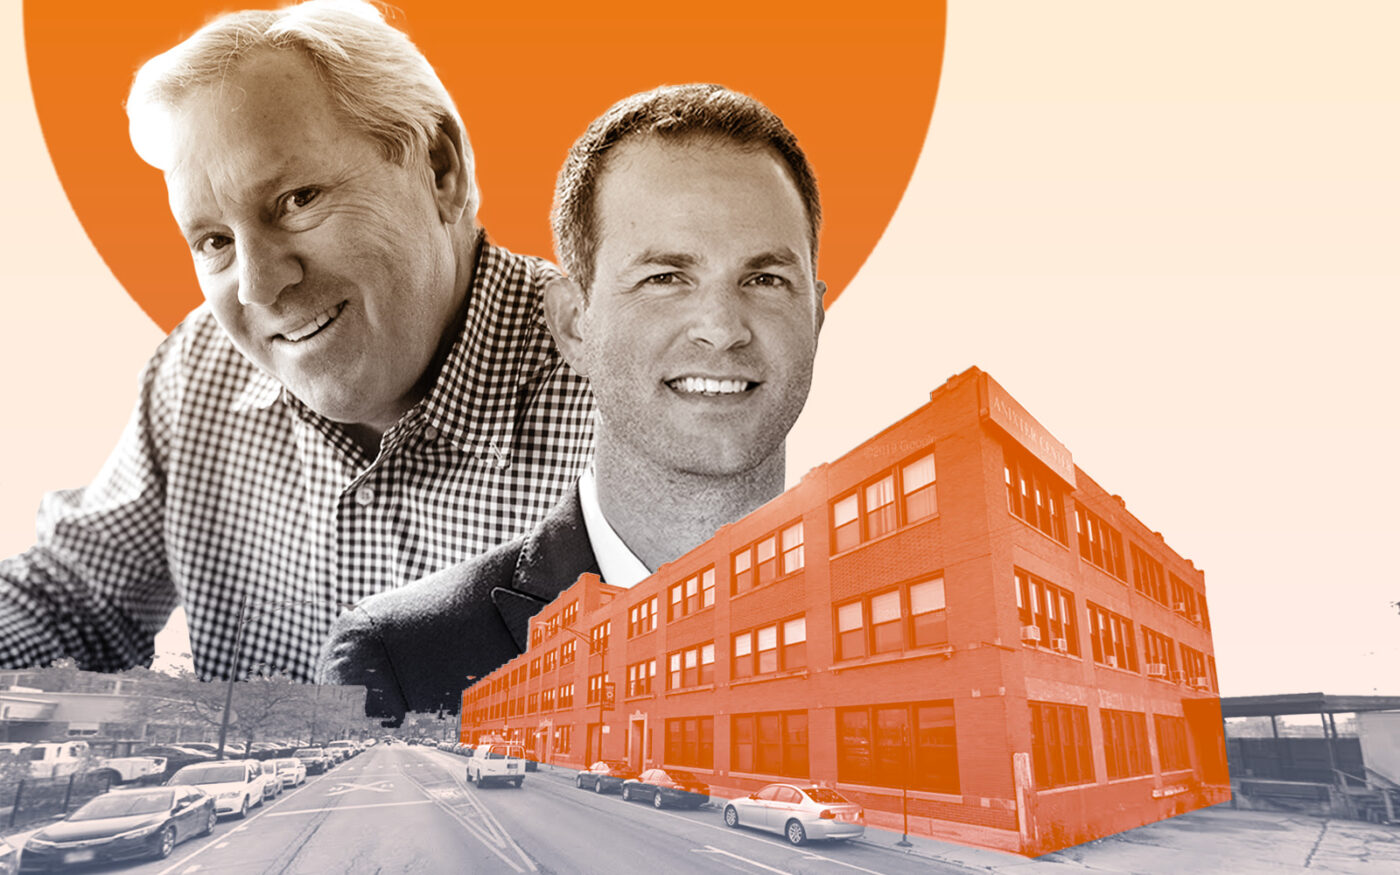 Heart of America CEO Mike Whalen, Jon Morgan, and 2032 North Clybourn Avenue